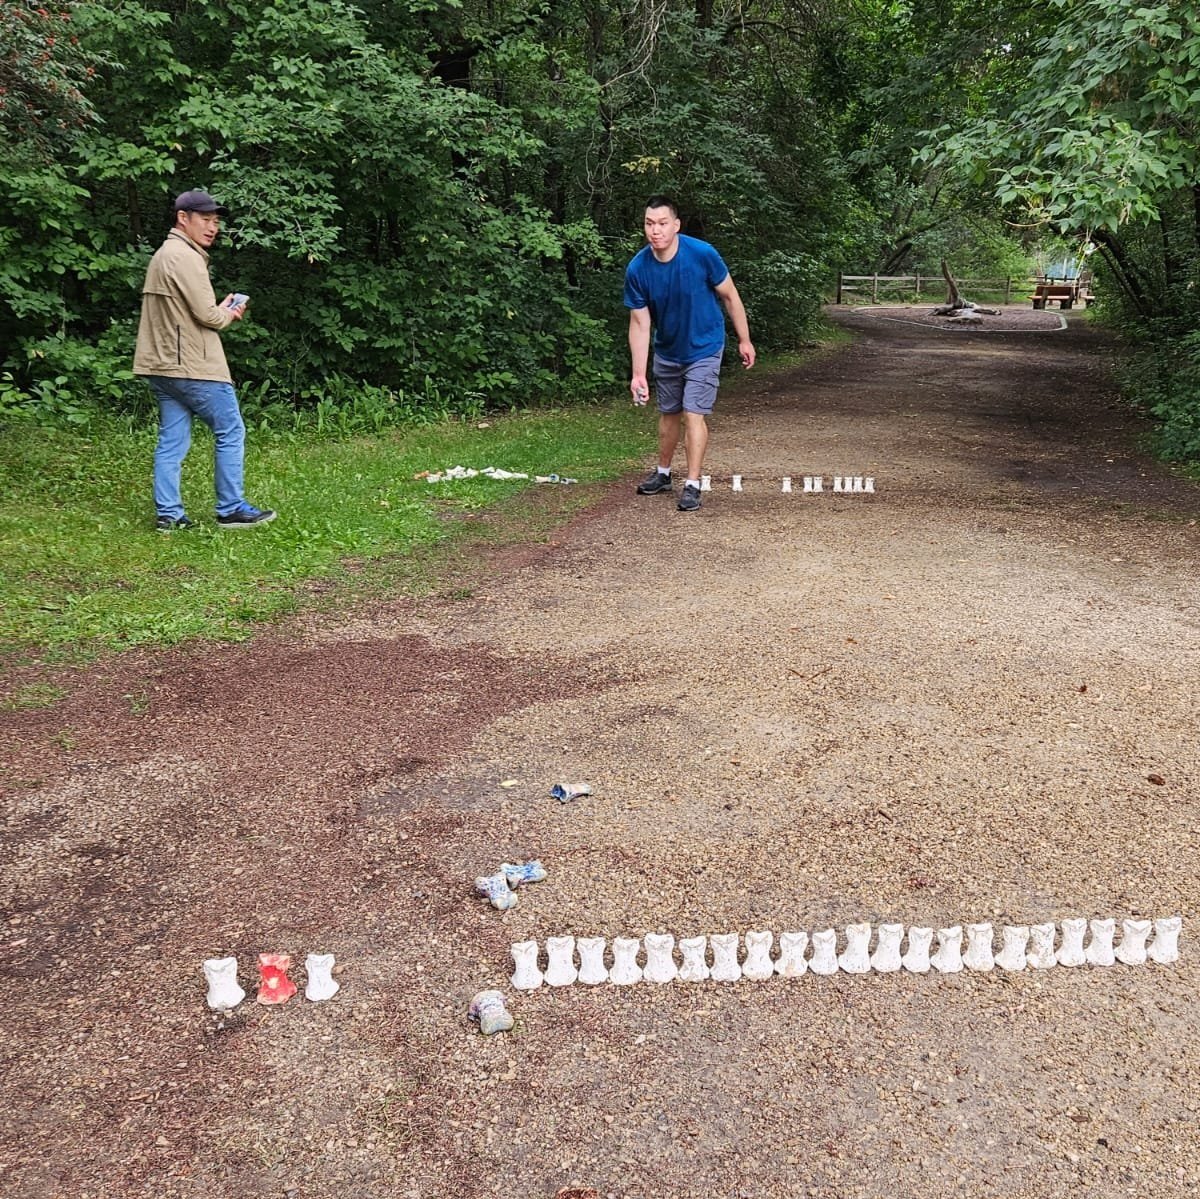  Two men are playing a lawn game on a dirt path. One man is about to throw a bone.  